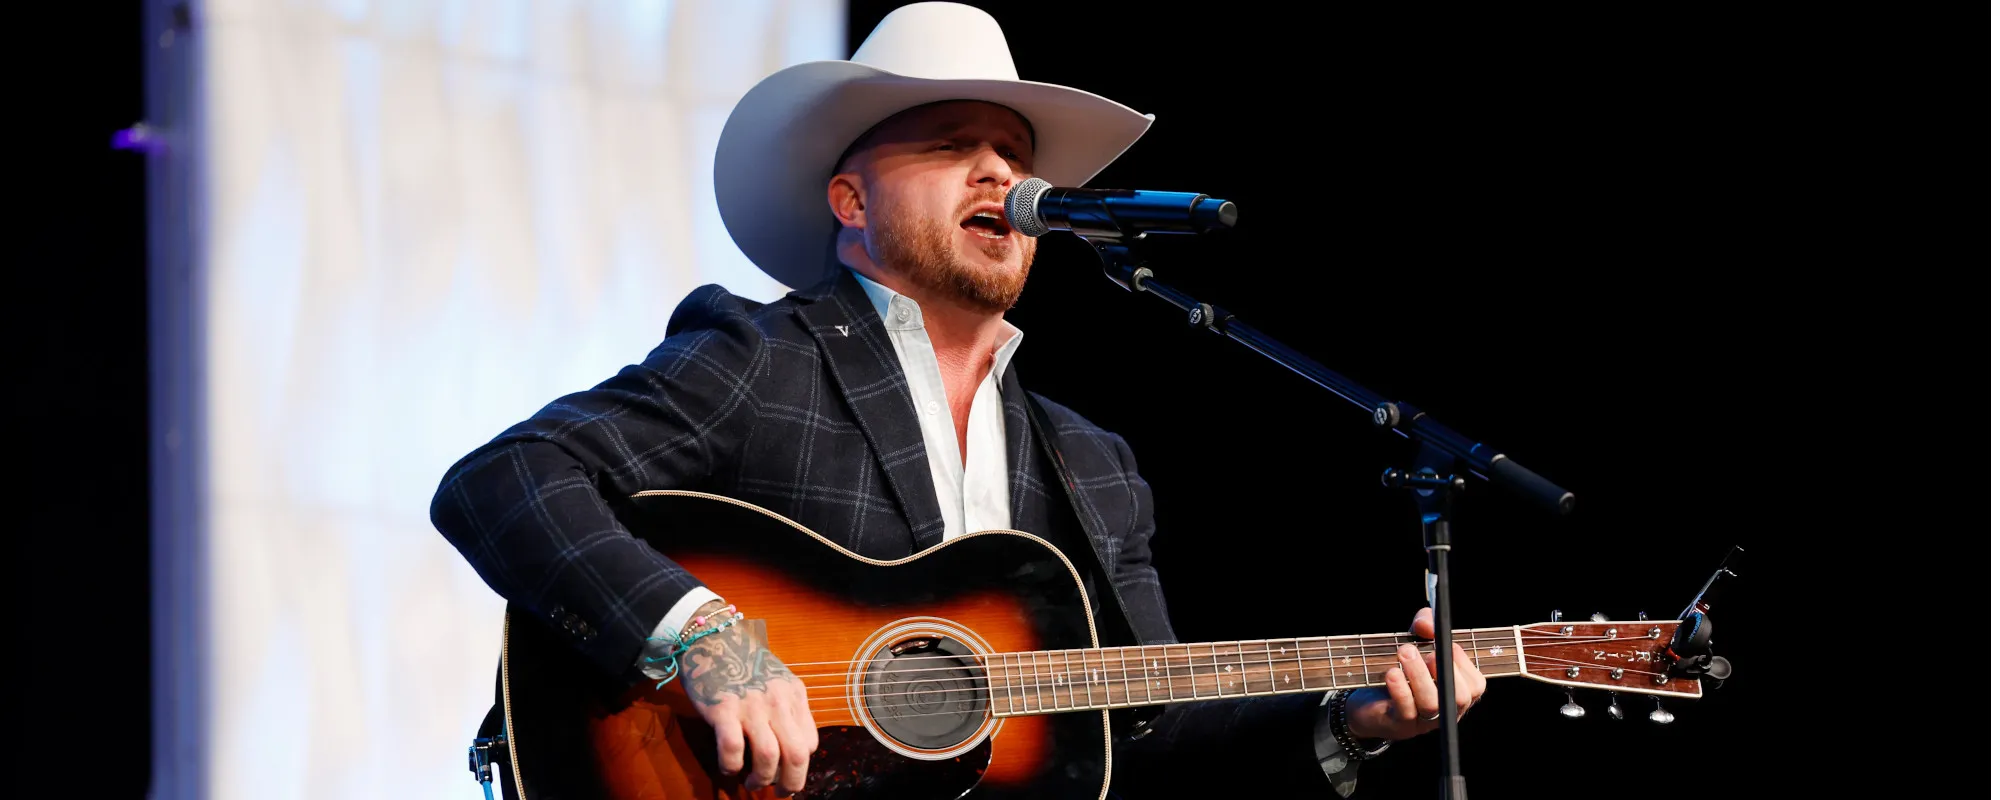 Watch Cody Johnson and His Daughters Perform Touching Rendition of “My Rifle, My Pony and Me” at the Grand Ole Opry